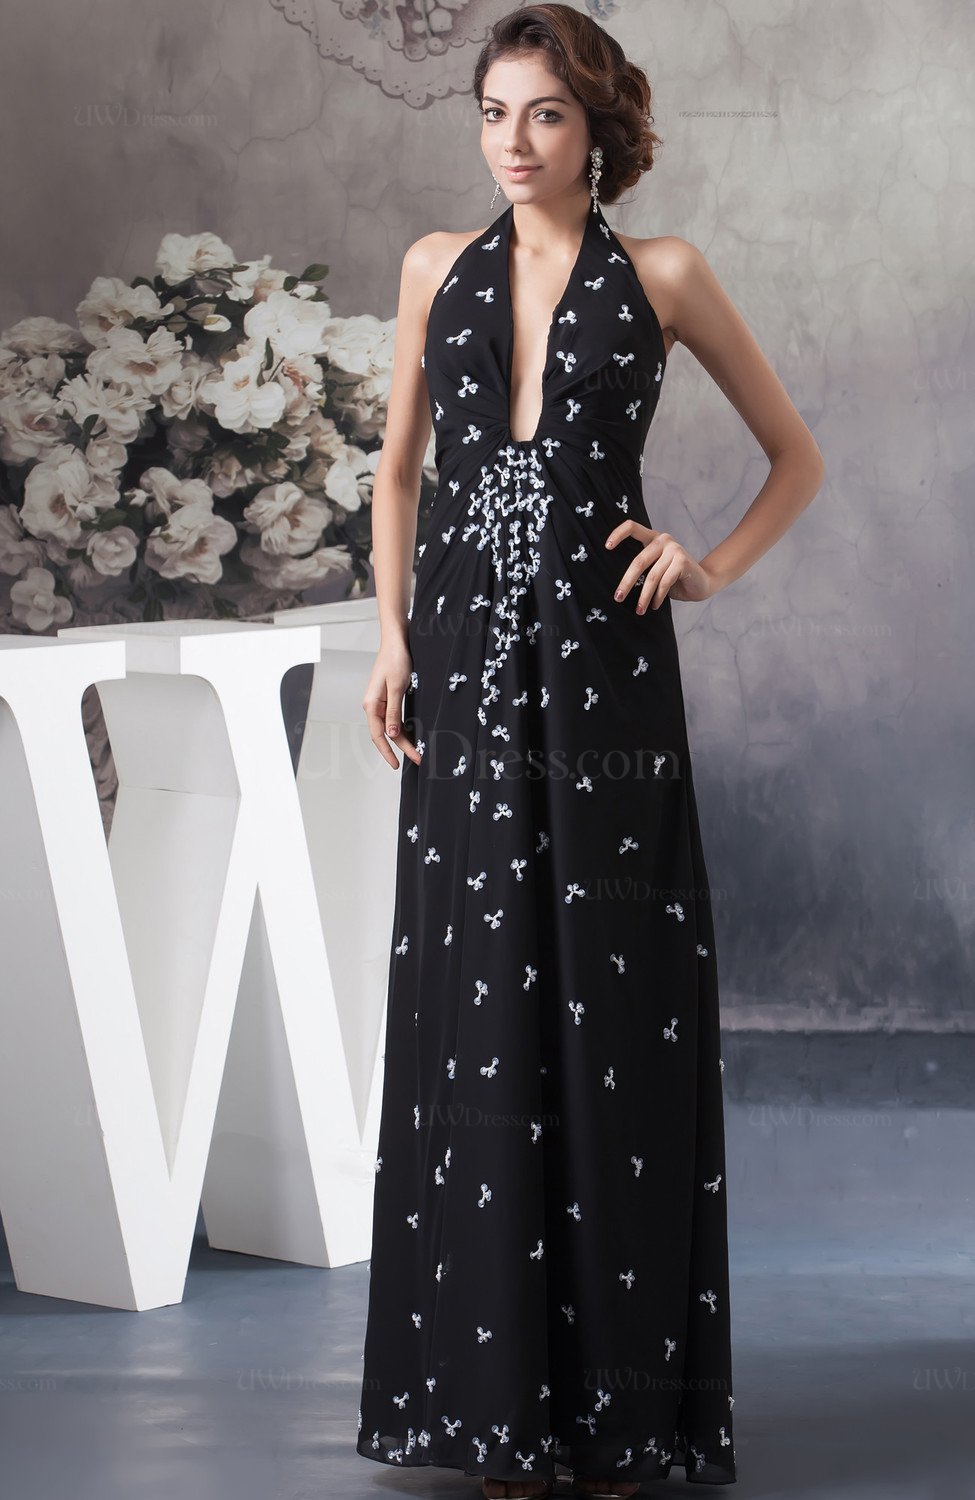 Black Inexpensive Wedding Guest Dress Unique Country